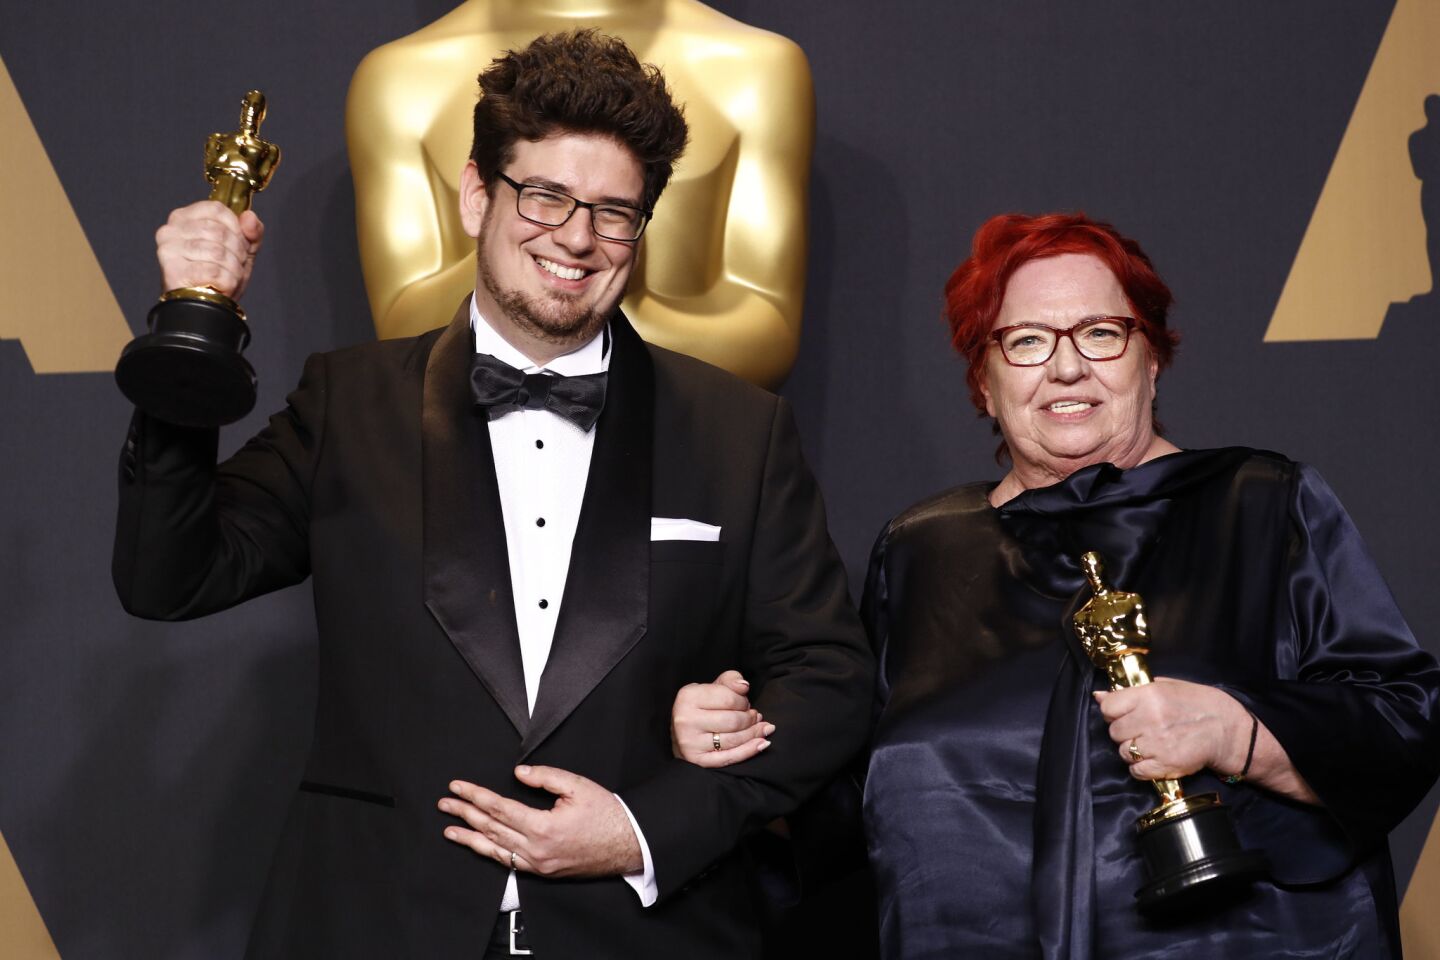 Kristof Deak and Anna Udvardy won the Oscar for live-action short film for "Sing."